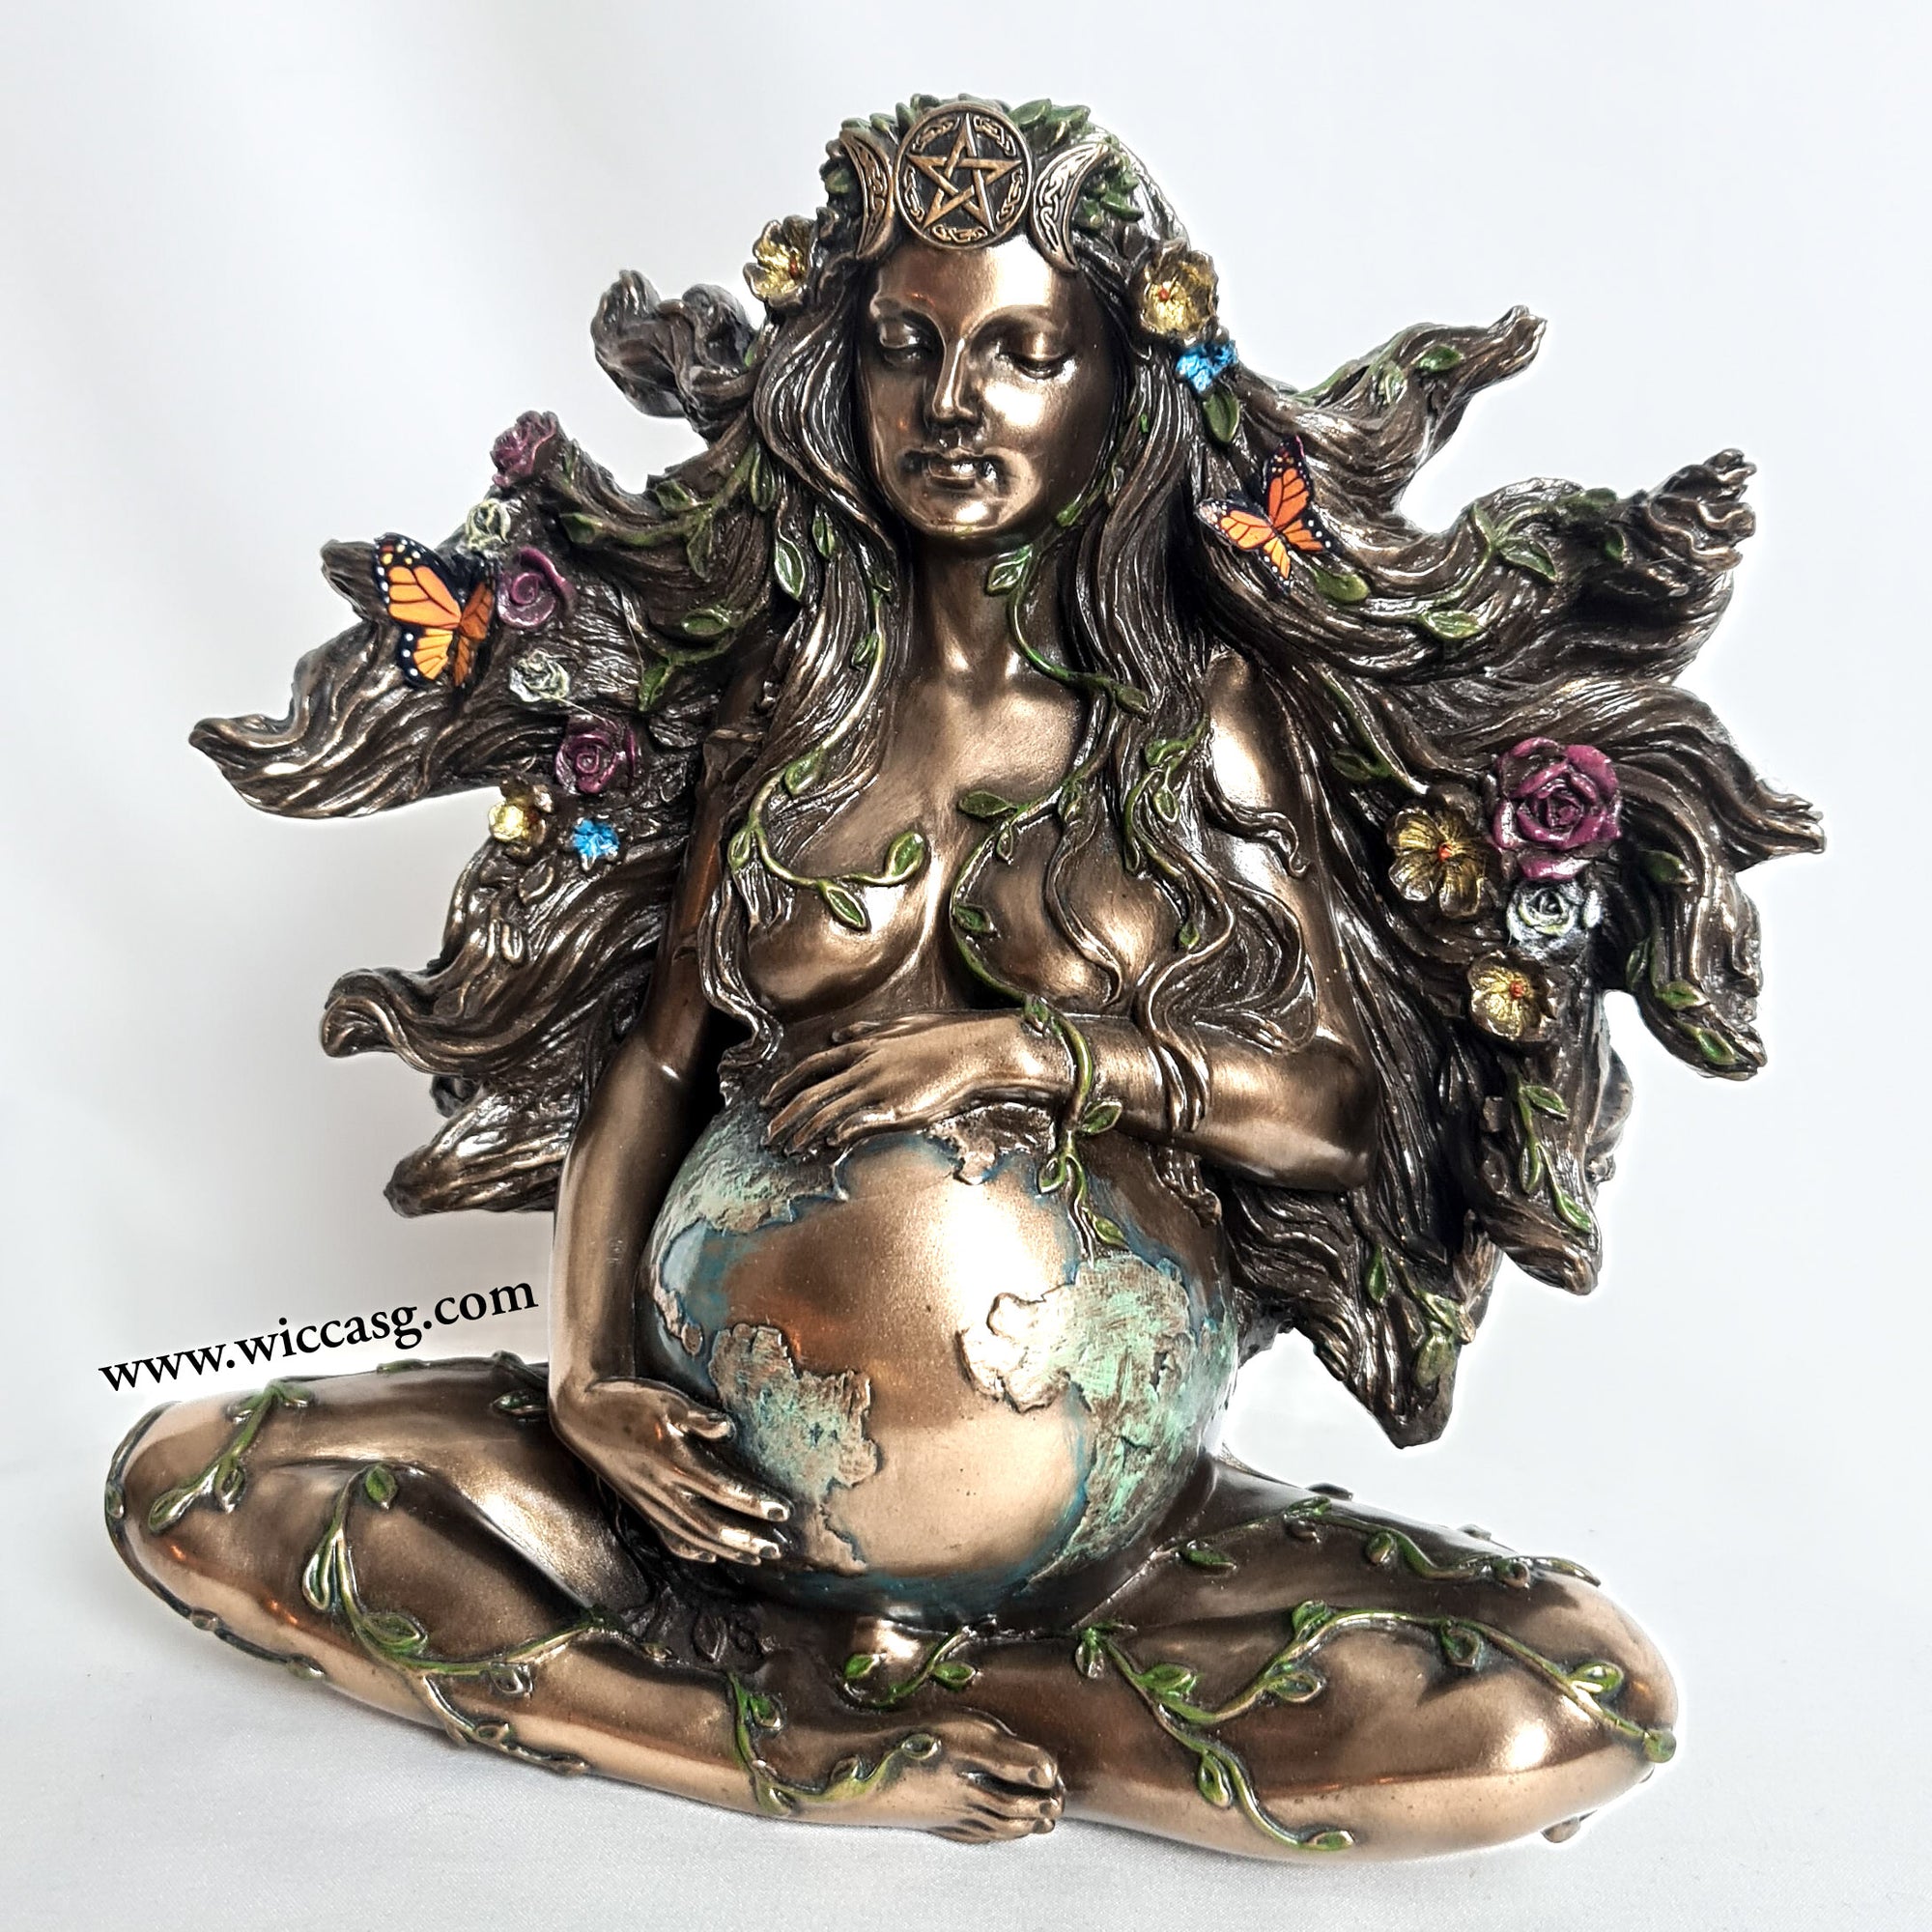 Mother Gaia (Earth)